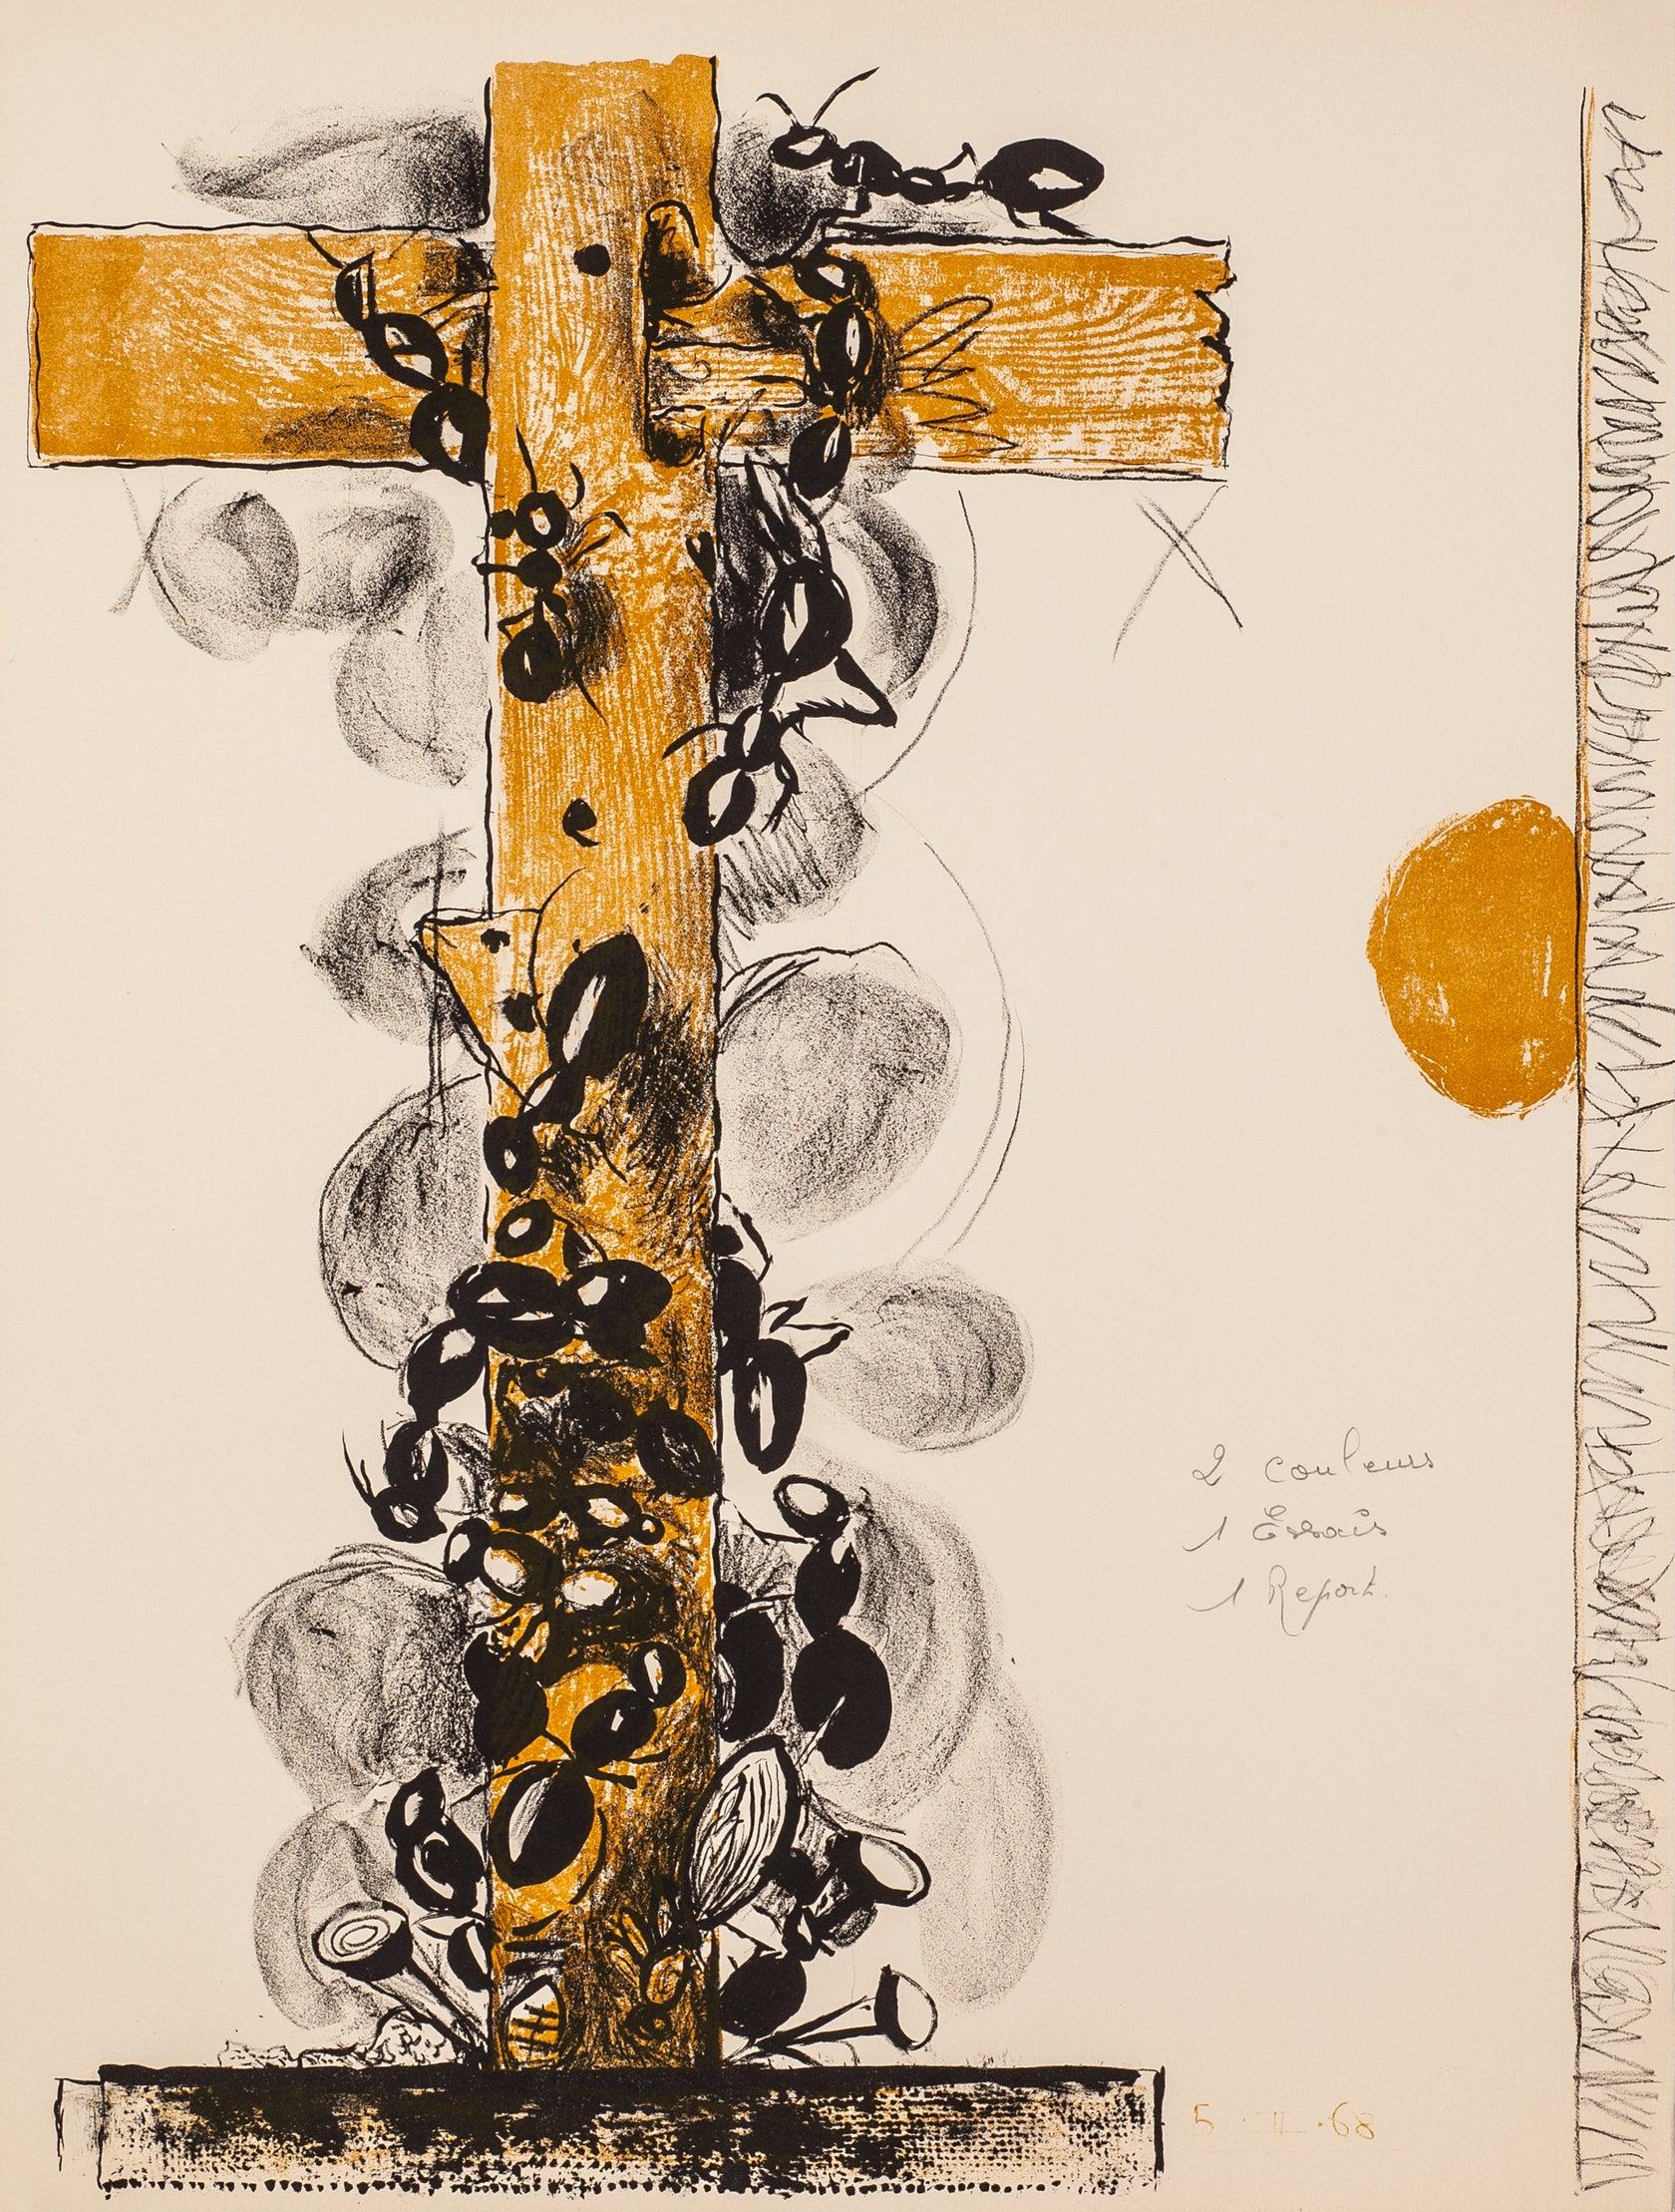 Artists: Graham Sutherland

Medium: Original Lithograph, From the portfolio A Bestiary and Some Correspondences, 1968

Dimensions: 26 x 20 in, 66 x 50.8 cm